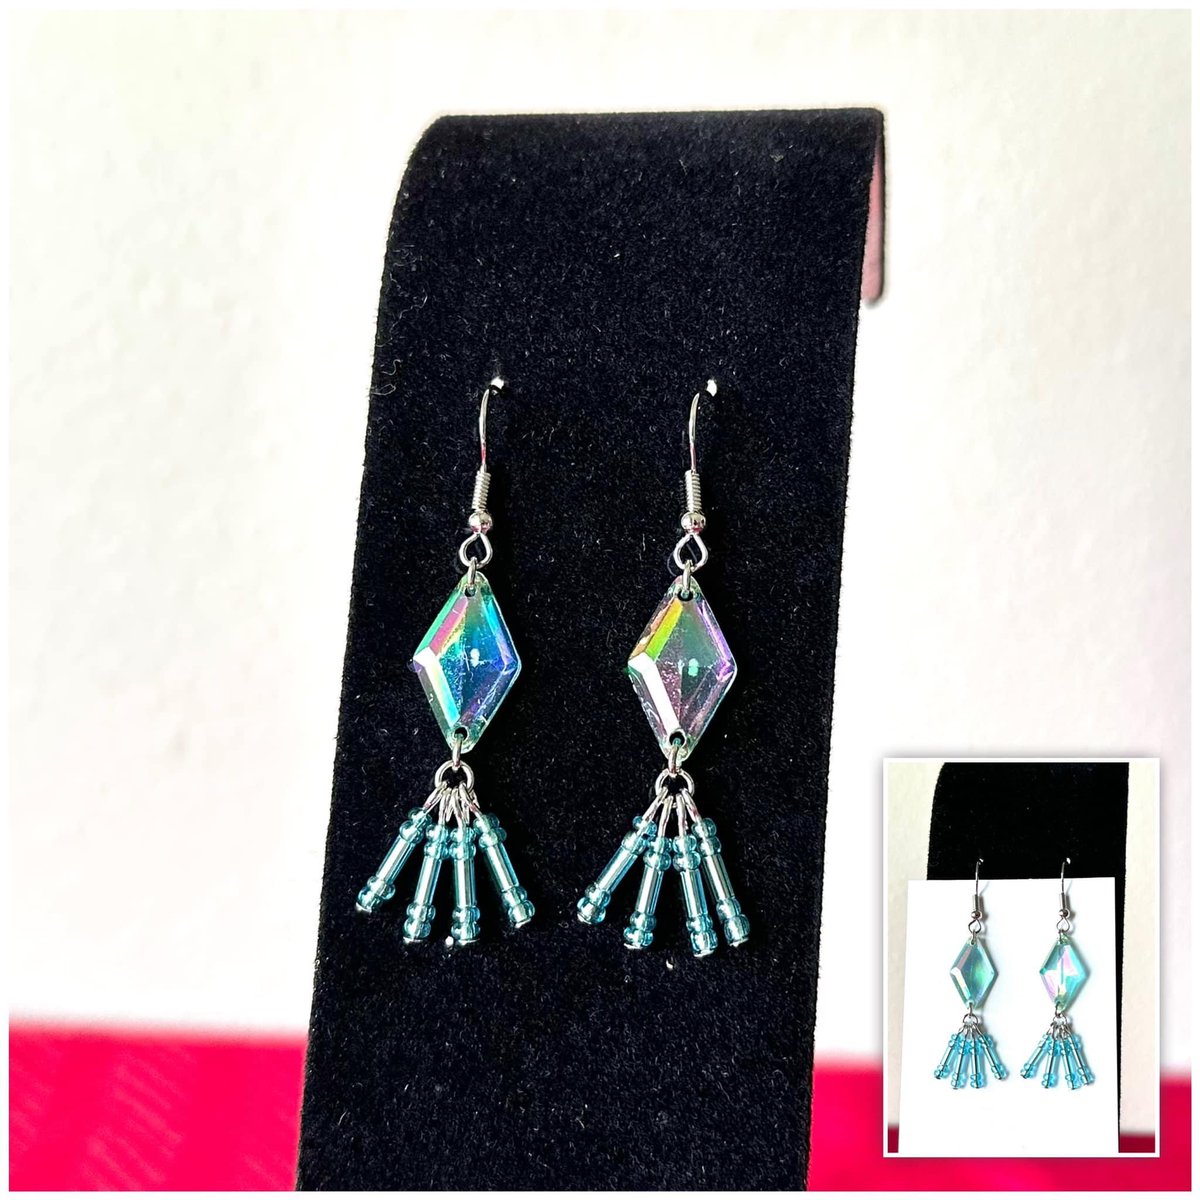 Blue Shiny Earrings
(Lighting can affect the way these earrings look)

Available in my Square shop:
justaskcassie.square.site/product/blue-s…

#blueearrings #bluejewelry #blue #shiny #shinyjewelry #shinyearrings #uniquejewelry #uniqueearrings